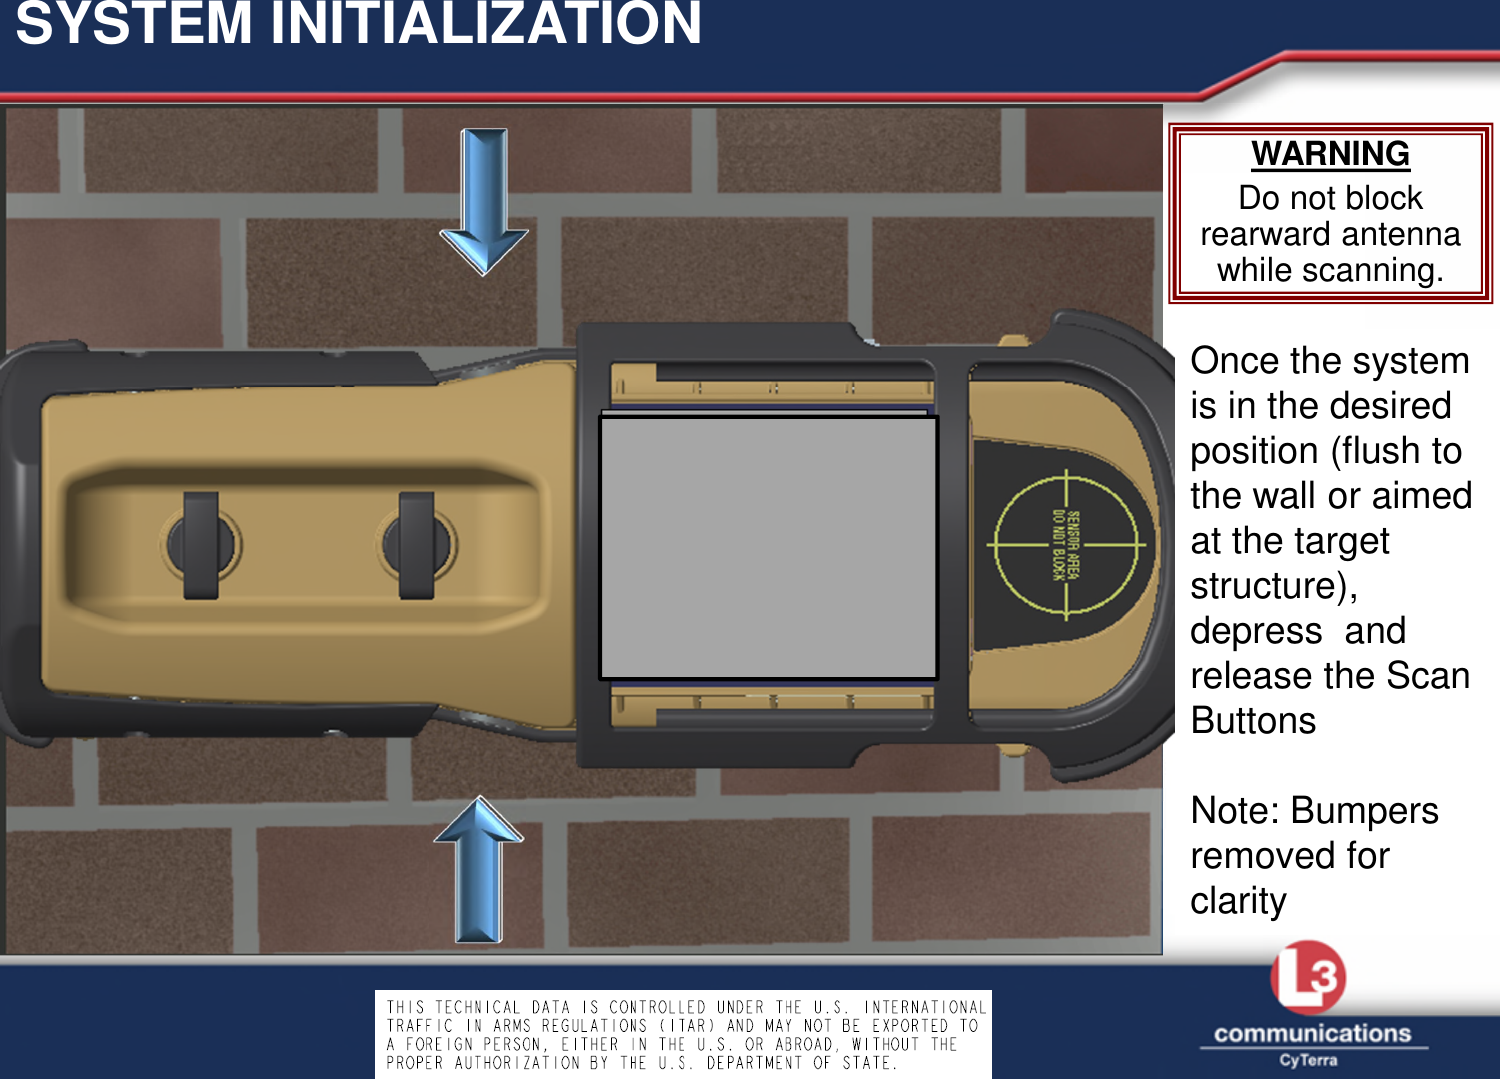 SYSTEM INITIALIZATIONWARNINGDo not block rearward antenna while scanning.Once the system is in the desired position (flush to the wall or aimed at the target structure), depress  and release the Scan ButtonsNote: Bumpers removed for clarity